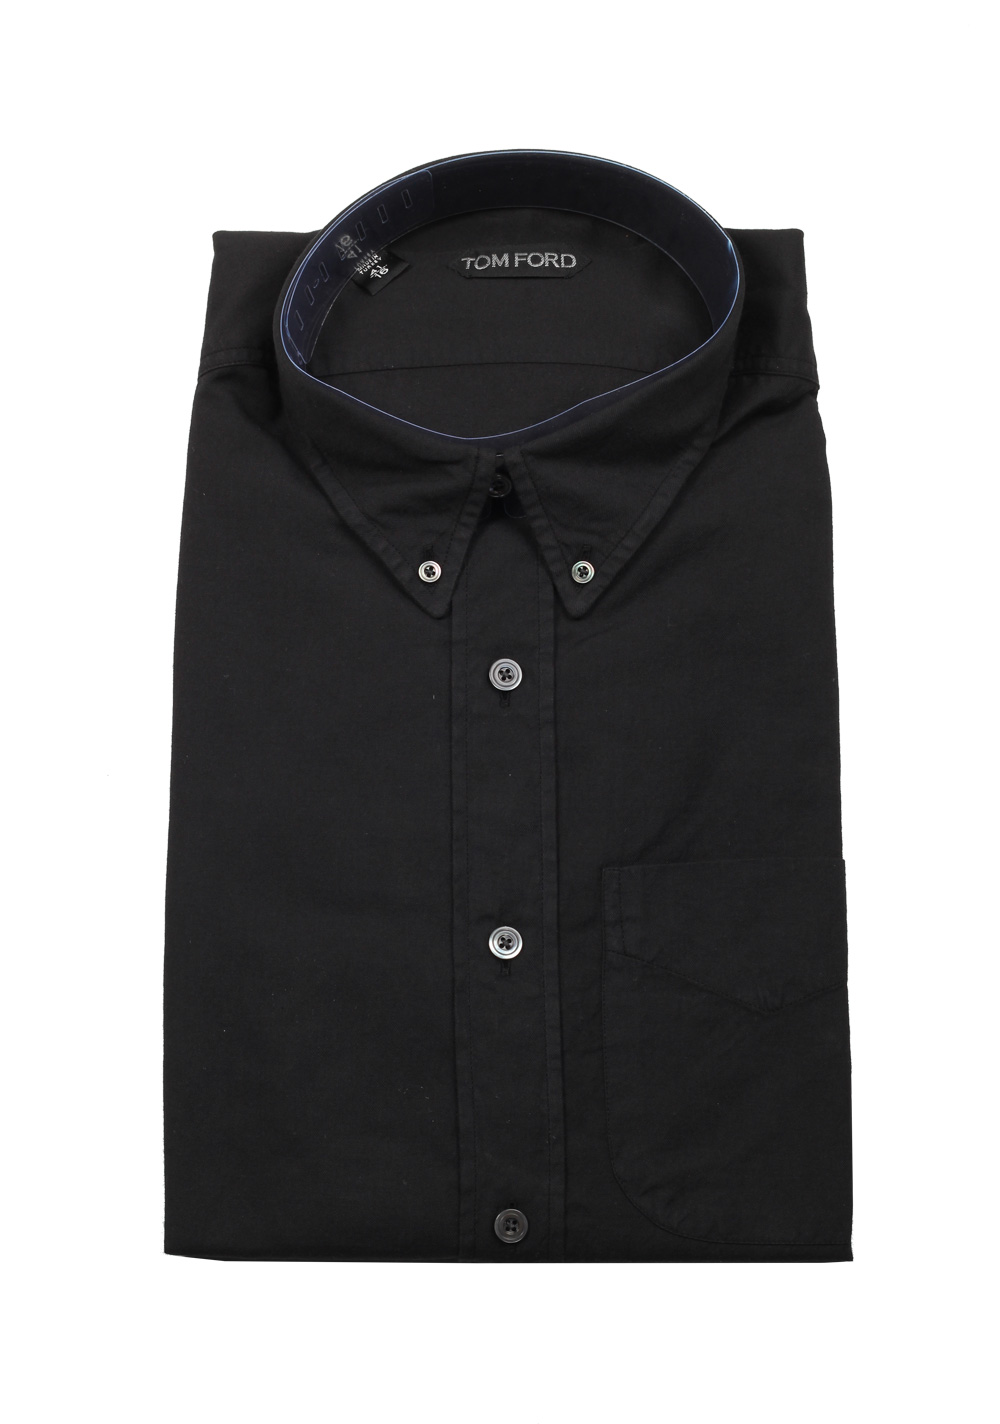 TOM FORD Solid Black Casual Shirt Size 41 / 16 U.S. | Costume Limité